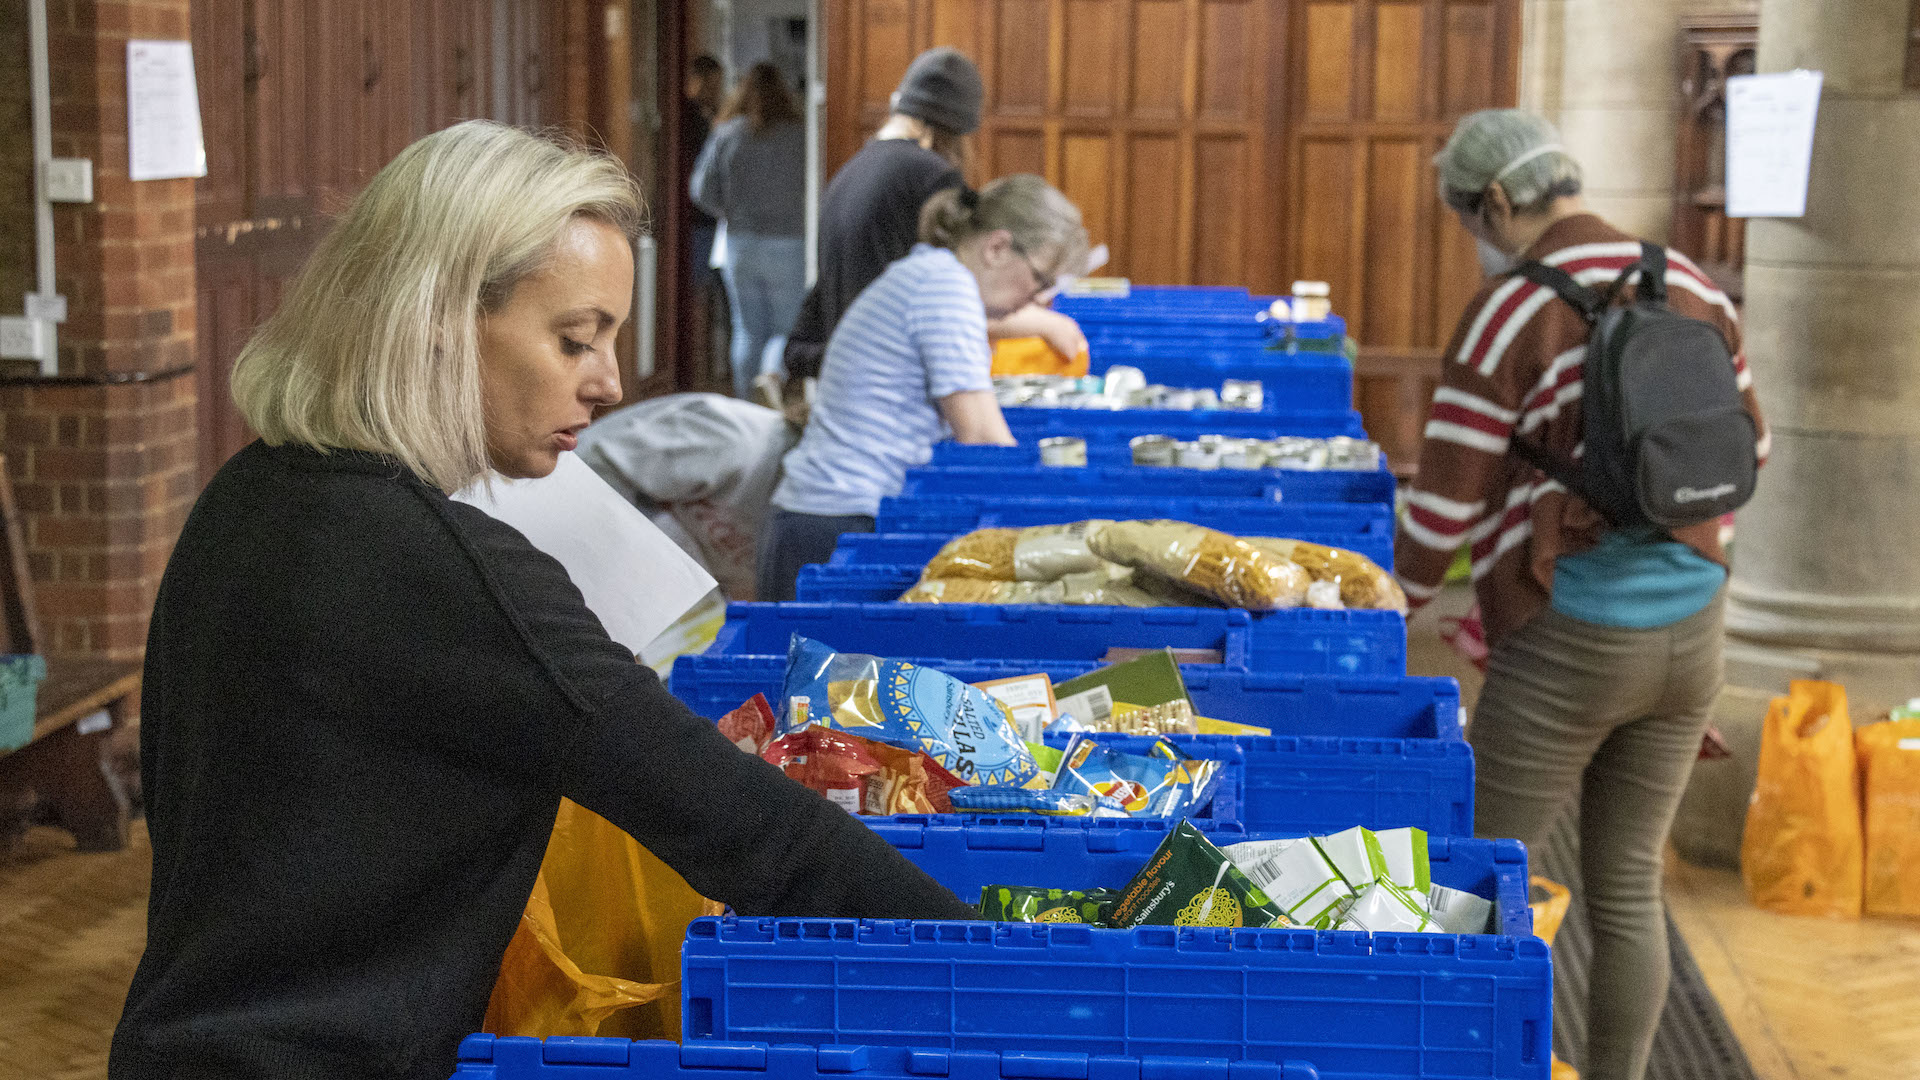 A woman at a food bank reaches into a blue plastic container filled with food